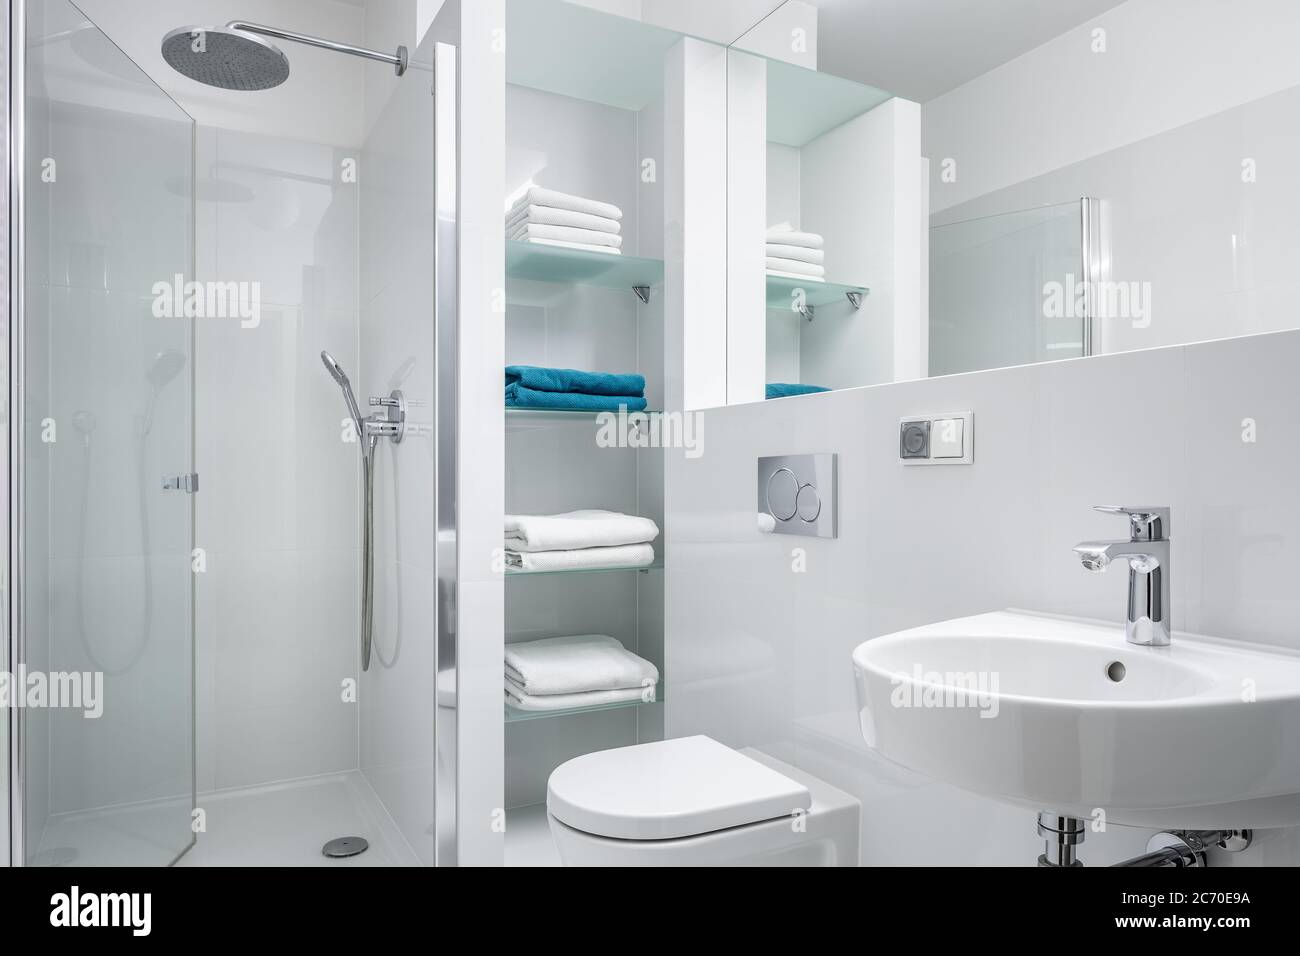 Simple designed white bathroom with shower and classic washbasin Stock Photo